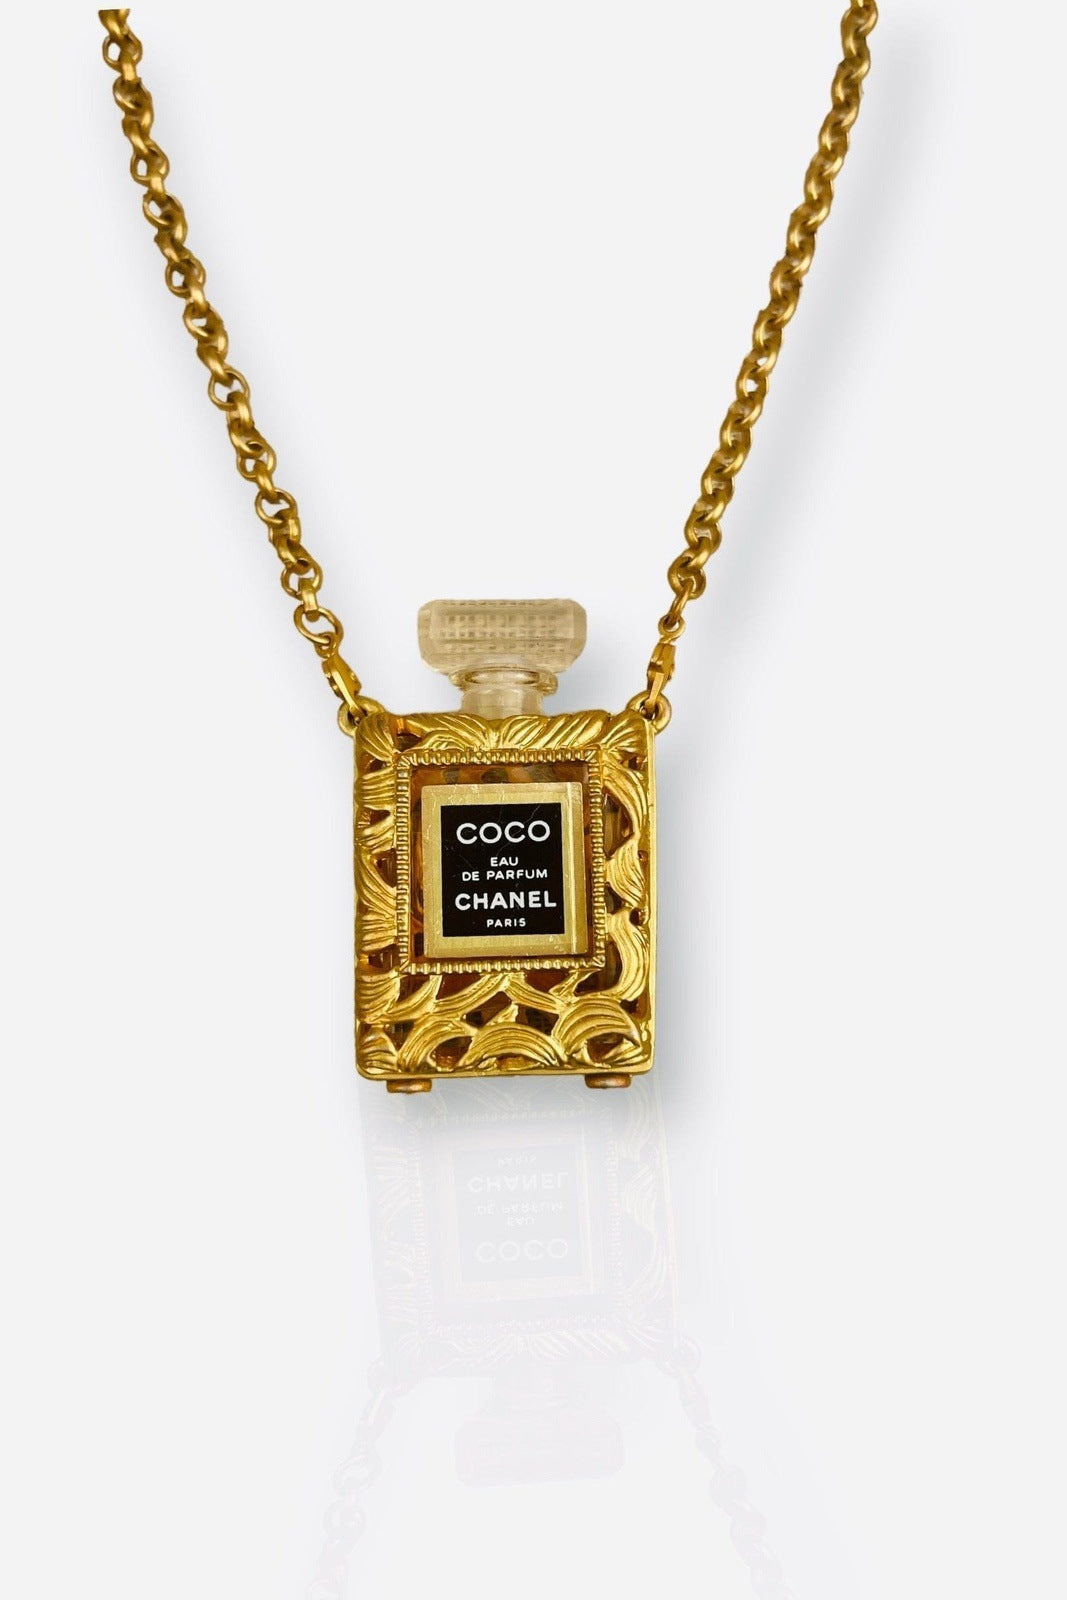 [Japan Used Necklace] Chanel No.19 Perfume Bottle Necklace